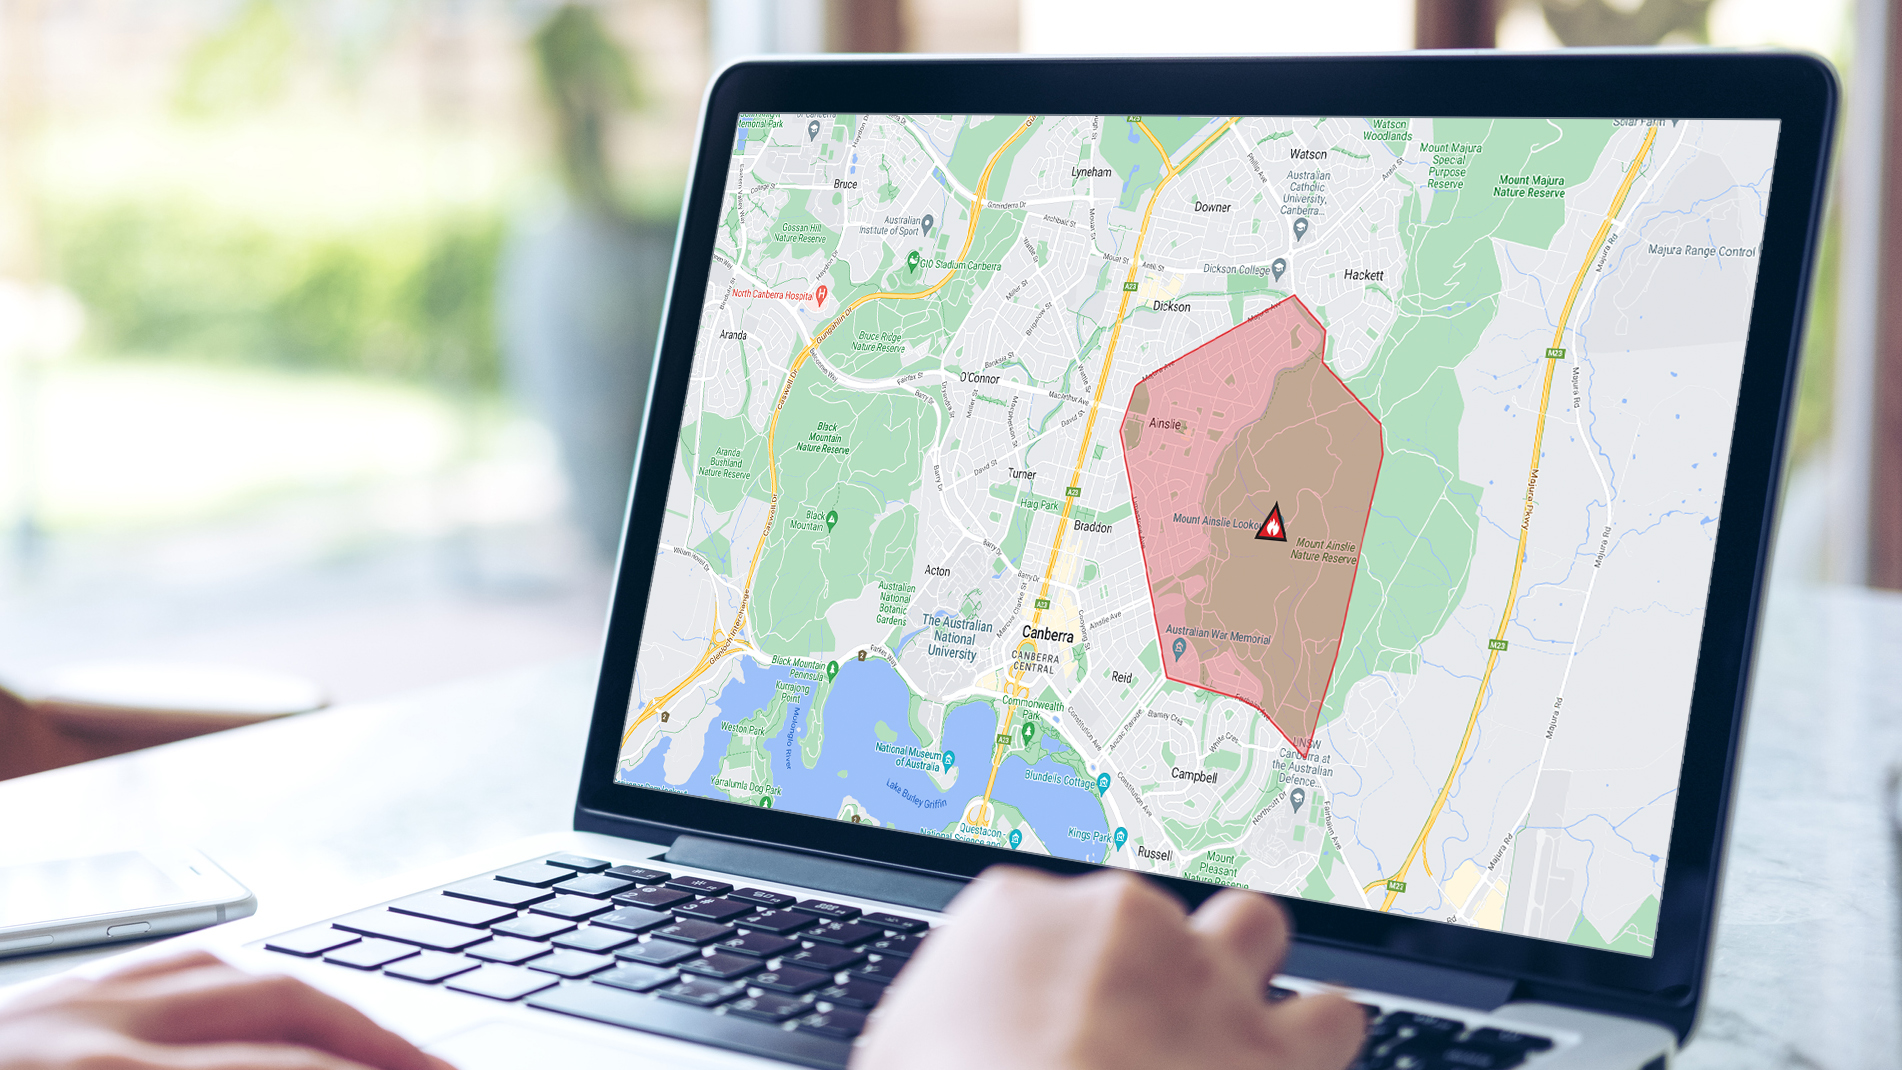 A map on a laptop screen showing a warning area